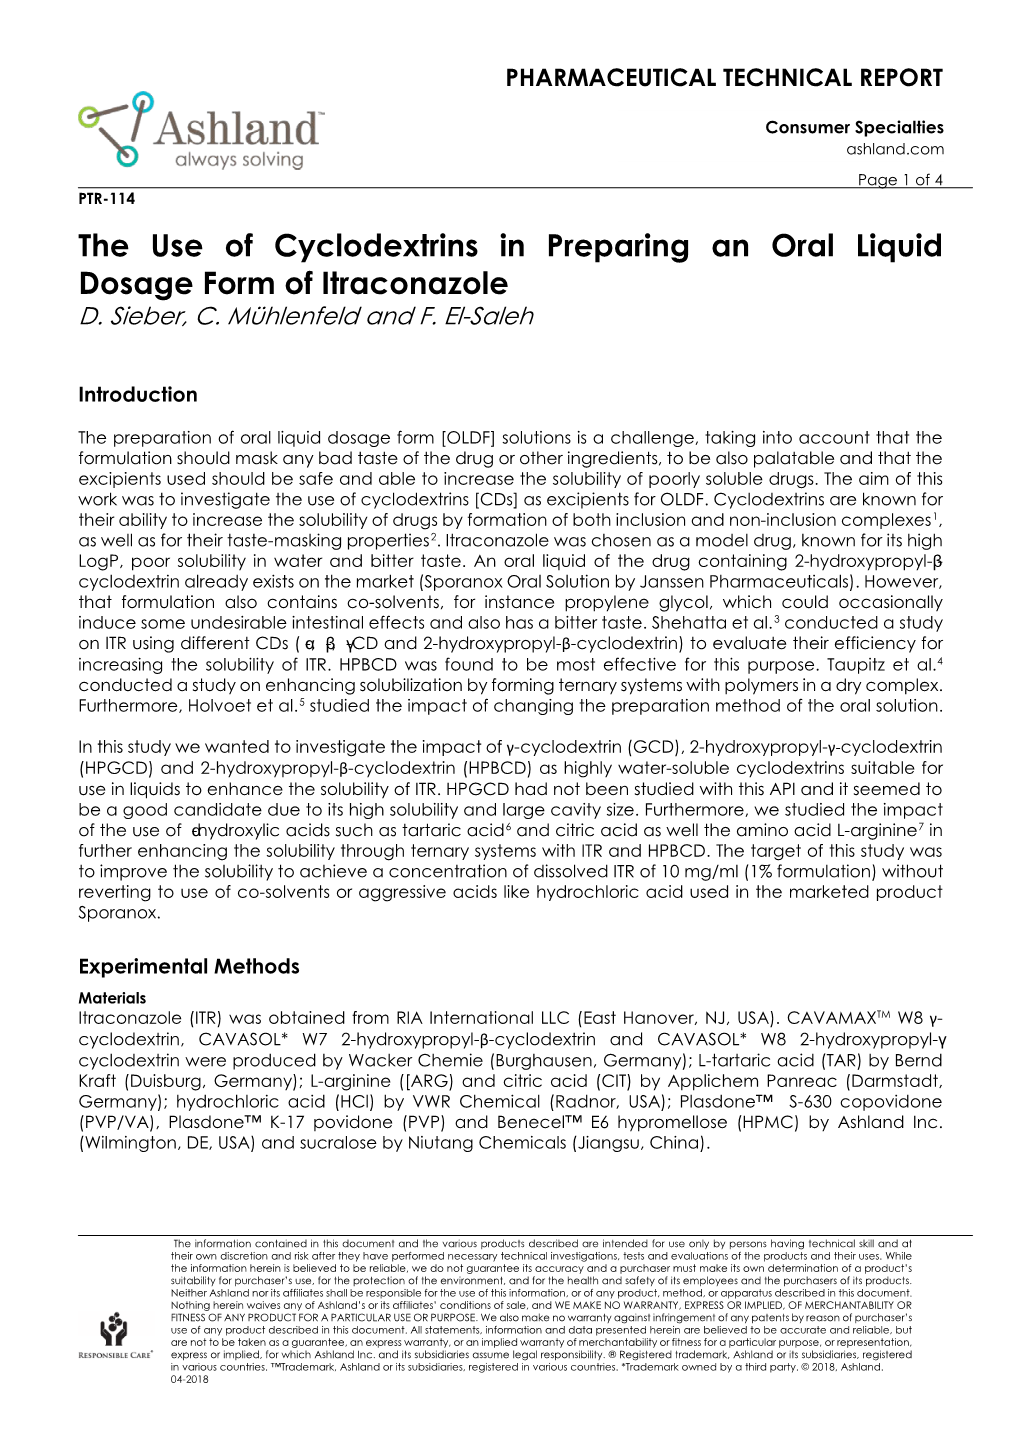 The Use of Cyclodextrins in Preparing an Oral Liquid Dosage Form of Itraconazole D